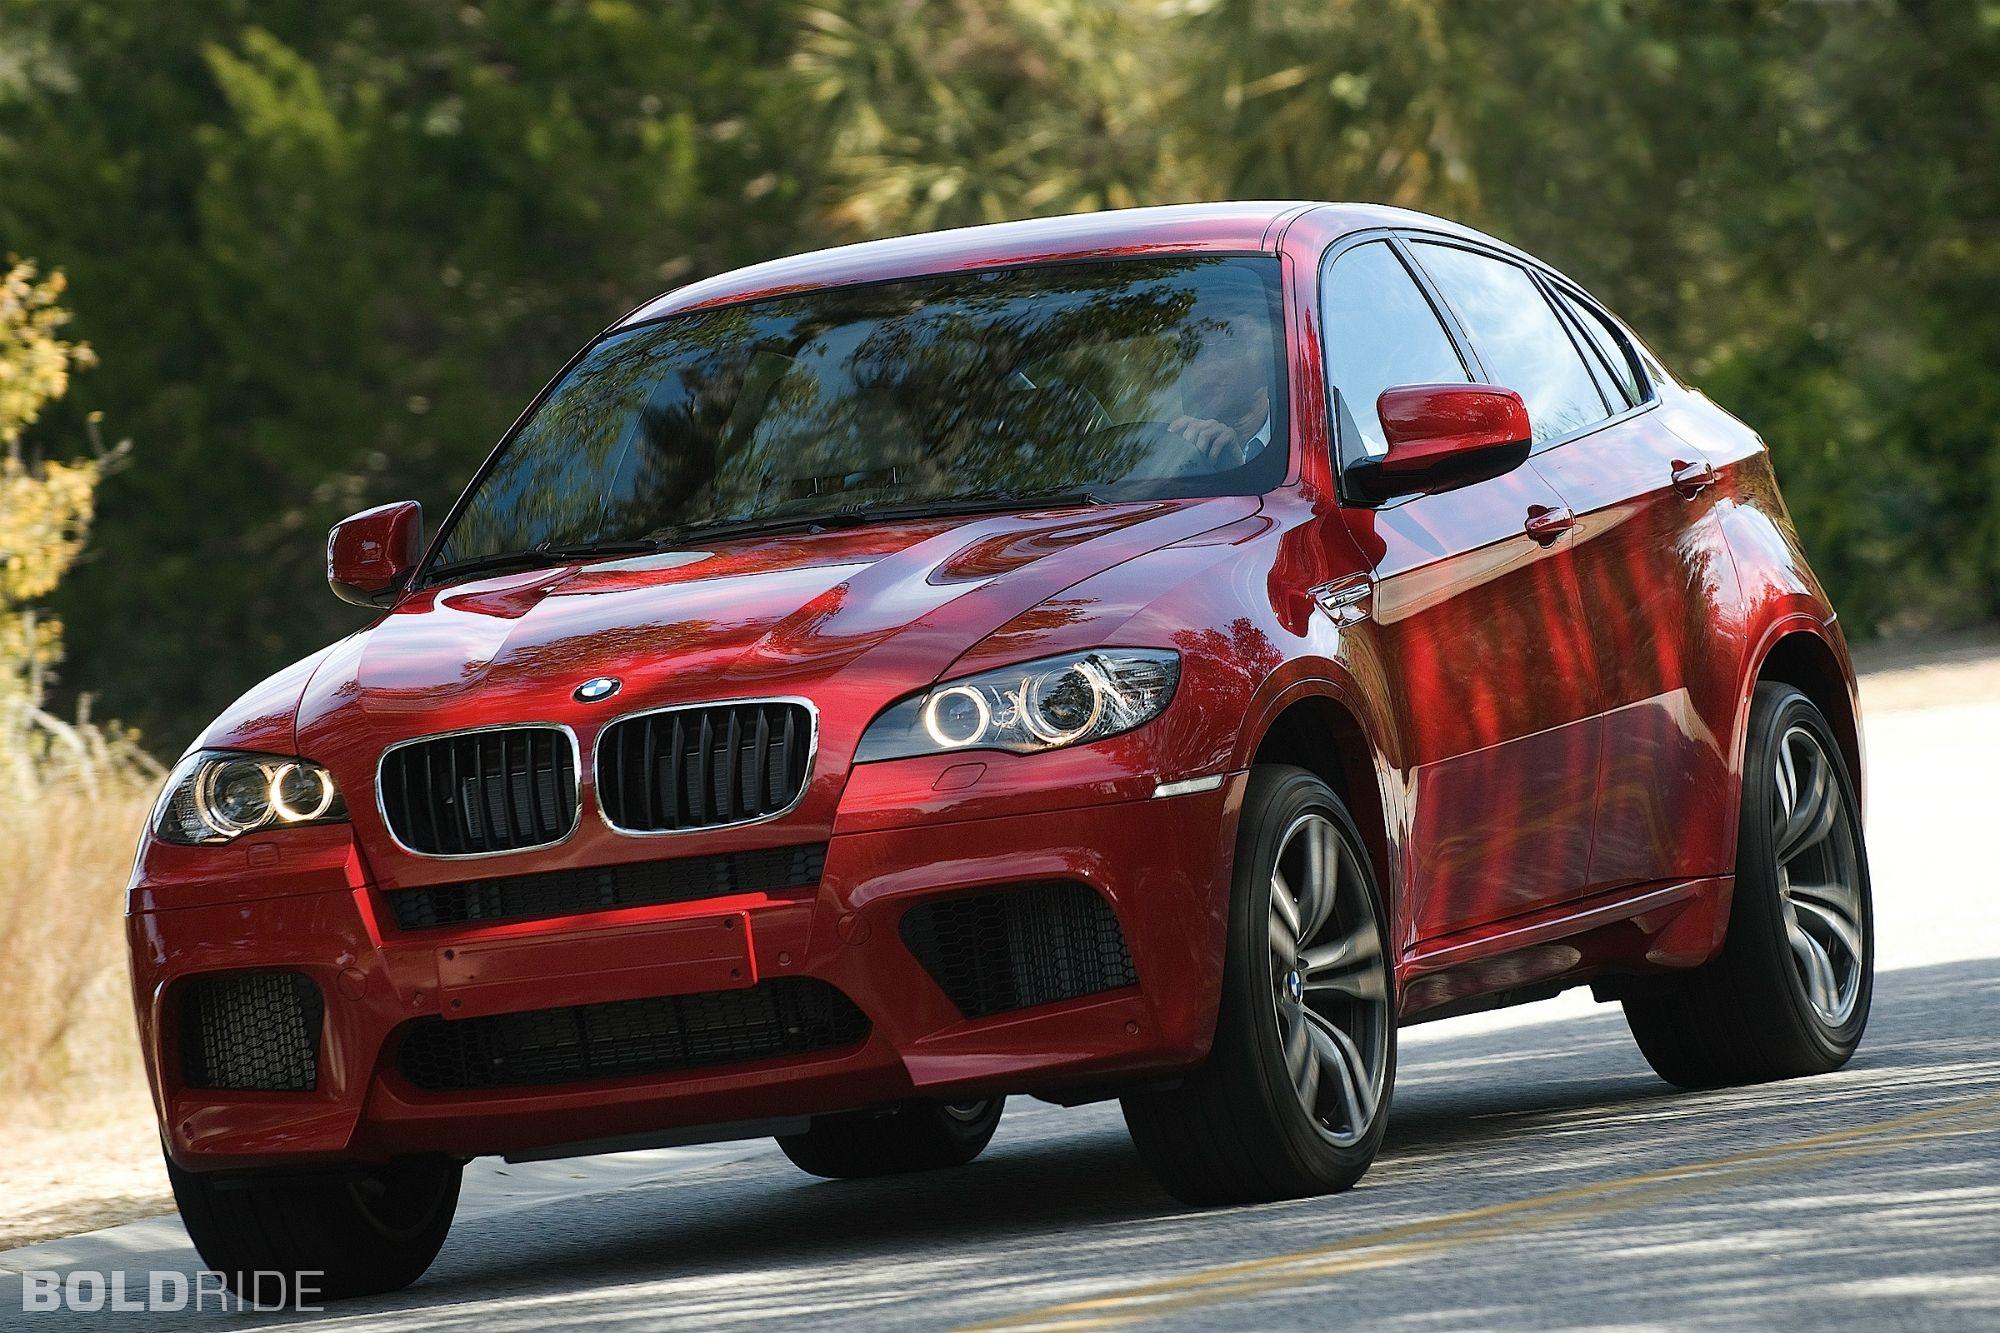 BMW X6 and photo